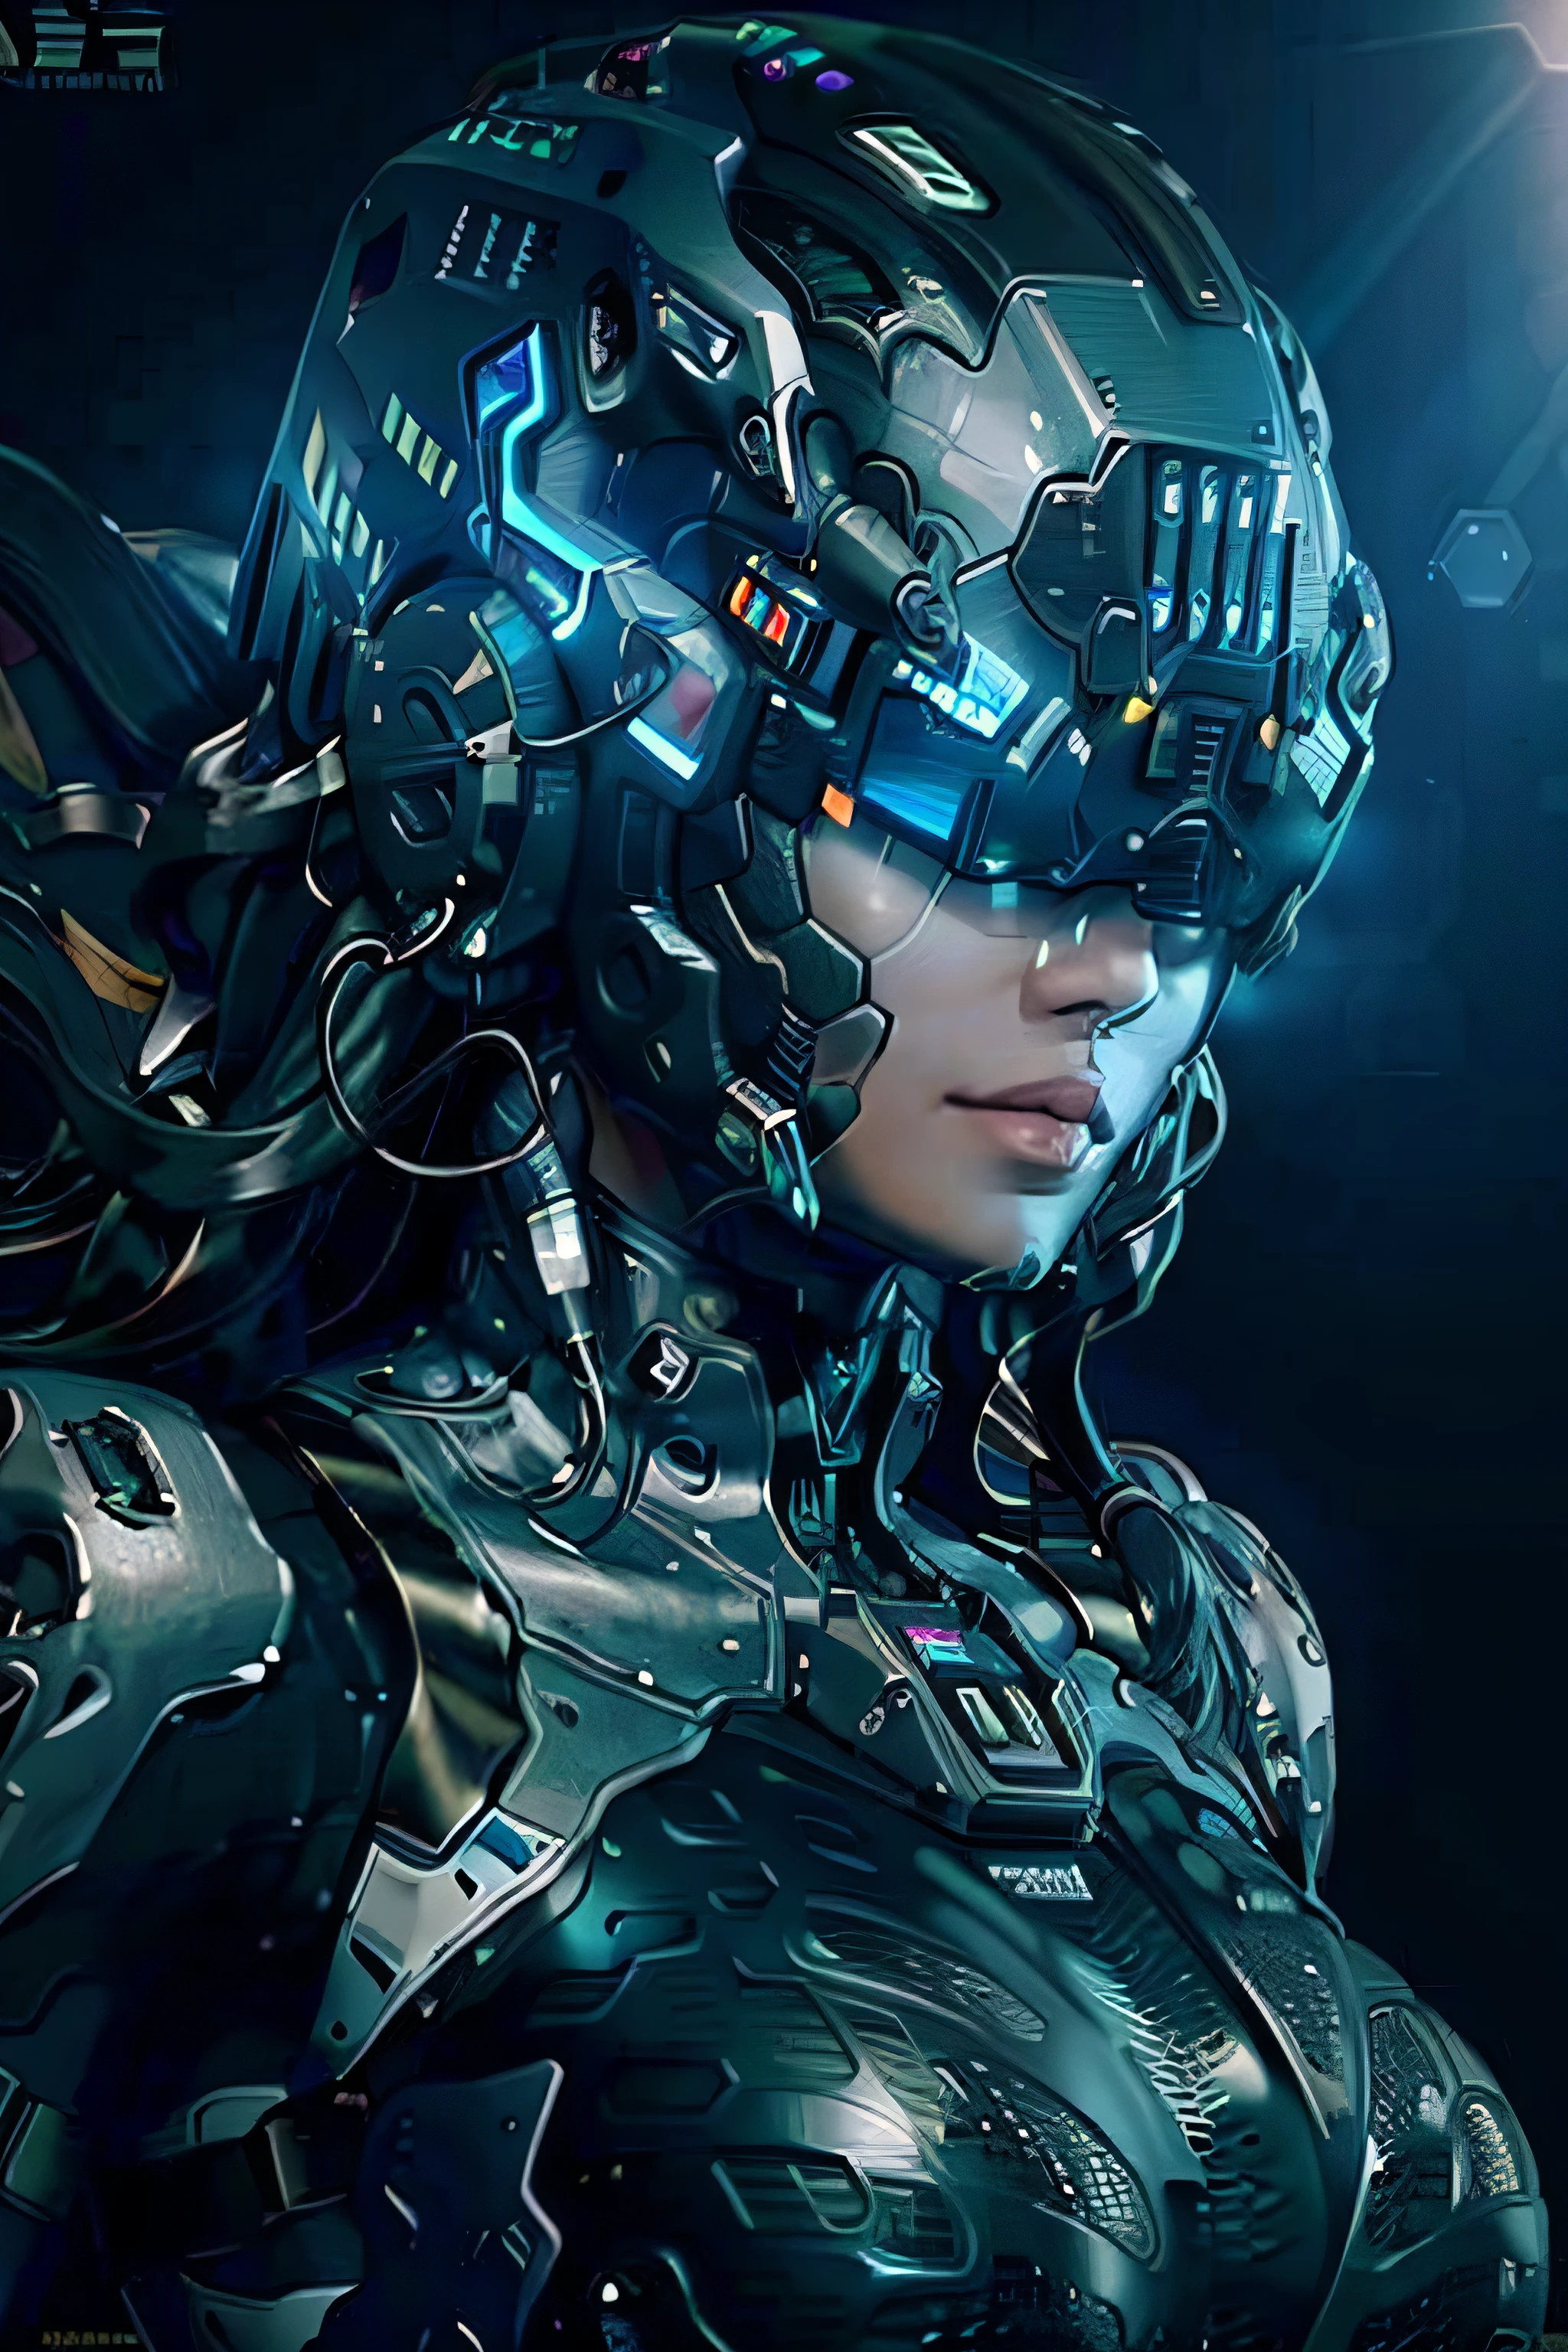 ((Best quality)), ((masterpiece)), (highly detailed:1.3), 3D,rfktr_technotrex, beautiful cyberpunk woman with voluminous hair,(wearing head-mounted display that is chunky and hi-tech:1.2),hacking a computer terminal,computer servers, LCD screens, fibre optic cables, corporate logos,HDR (High Dynamic Range),Ray Tracing,NVIDIA RTX,Super-Resolution,Unreal 5,Subsurface scattering,PBR Texturing,Post-processing,Anisotropic Filtering,Depth-of-field,Maximum clarity and sharpness,Multi-layered textures,Albedo and Specular maps,Surface shading,Accurate simulation of light-material interaction,Perfect proportions,Octane Render,Two-tone lighting,Low ISO,White balance,Rule of thirds,Wide aperature,8K RAW,Efficient Sub-Pixel,sub-pixel convolution,luminescent particles,light scattering,Tyndall effect